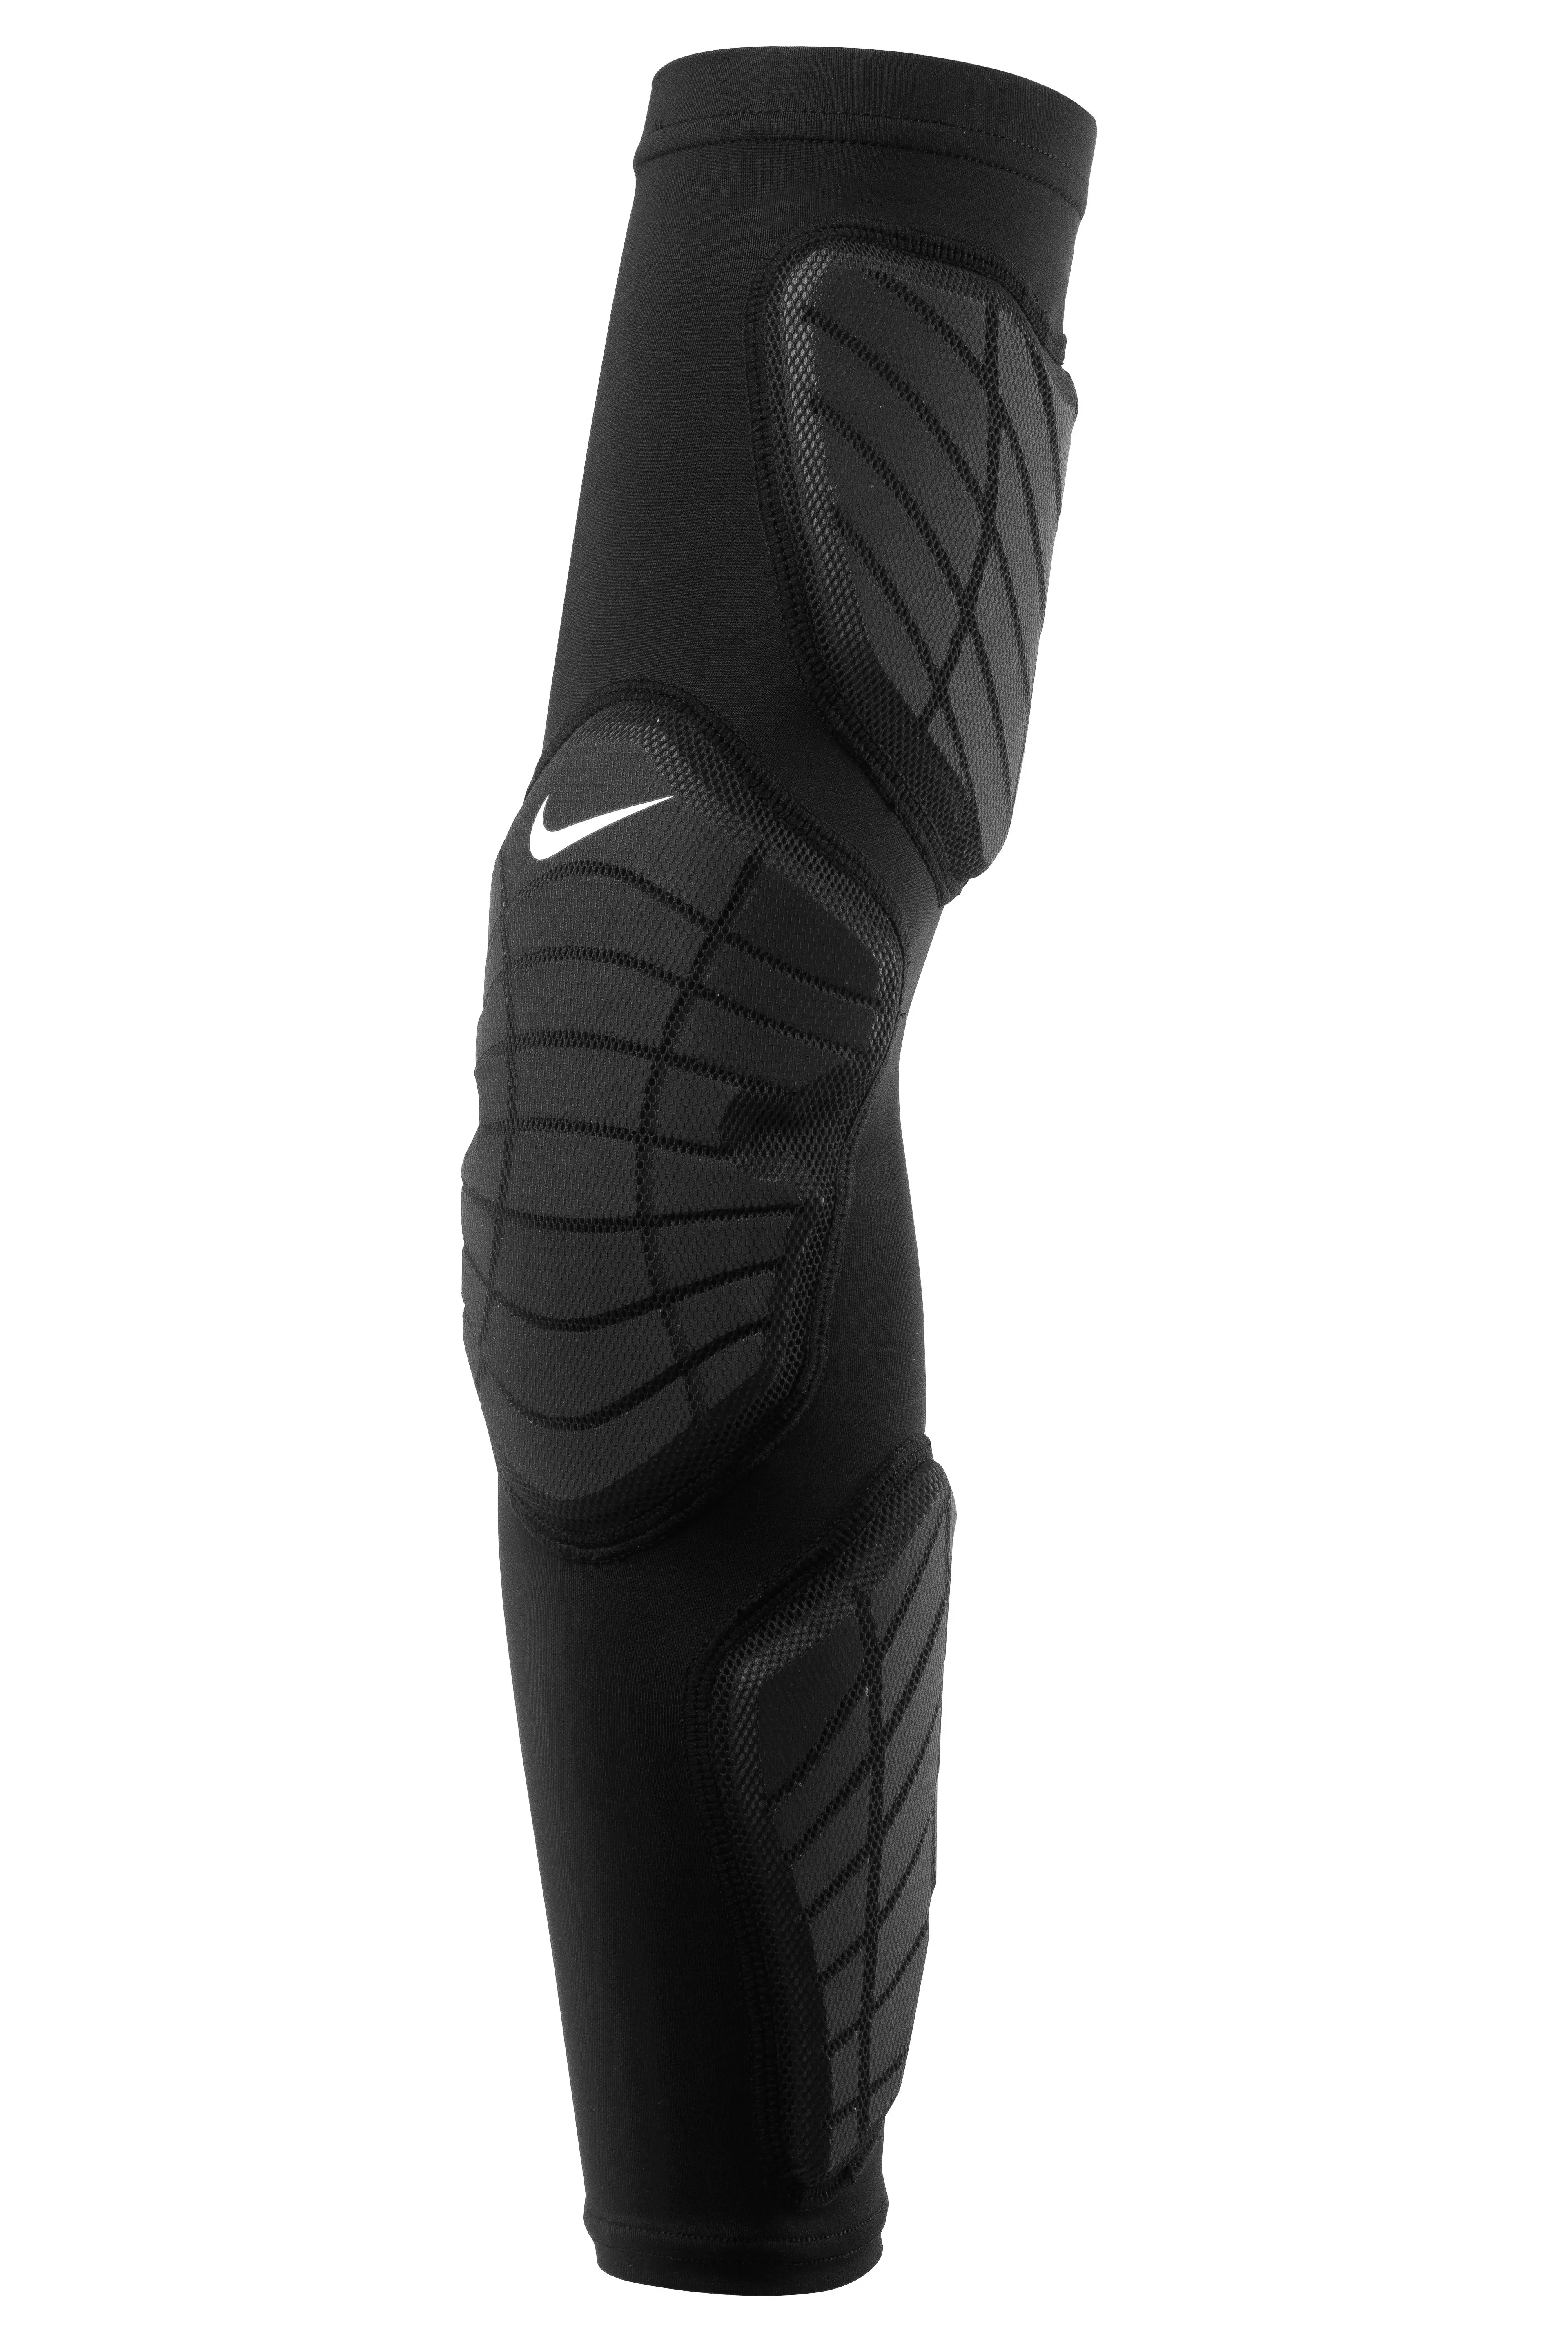 Nike Pro Adult Hyperstrong Padded Football Arm Sleeve 3.0- Left